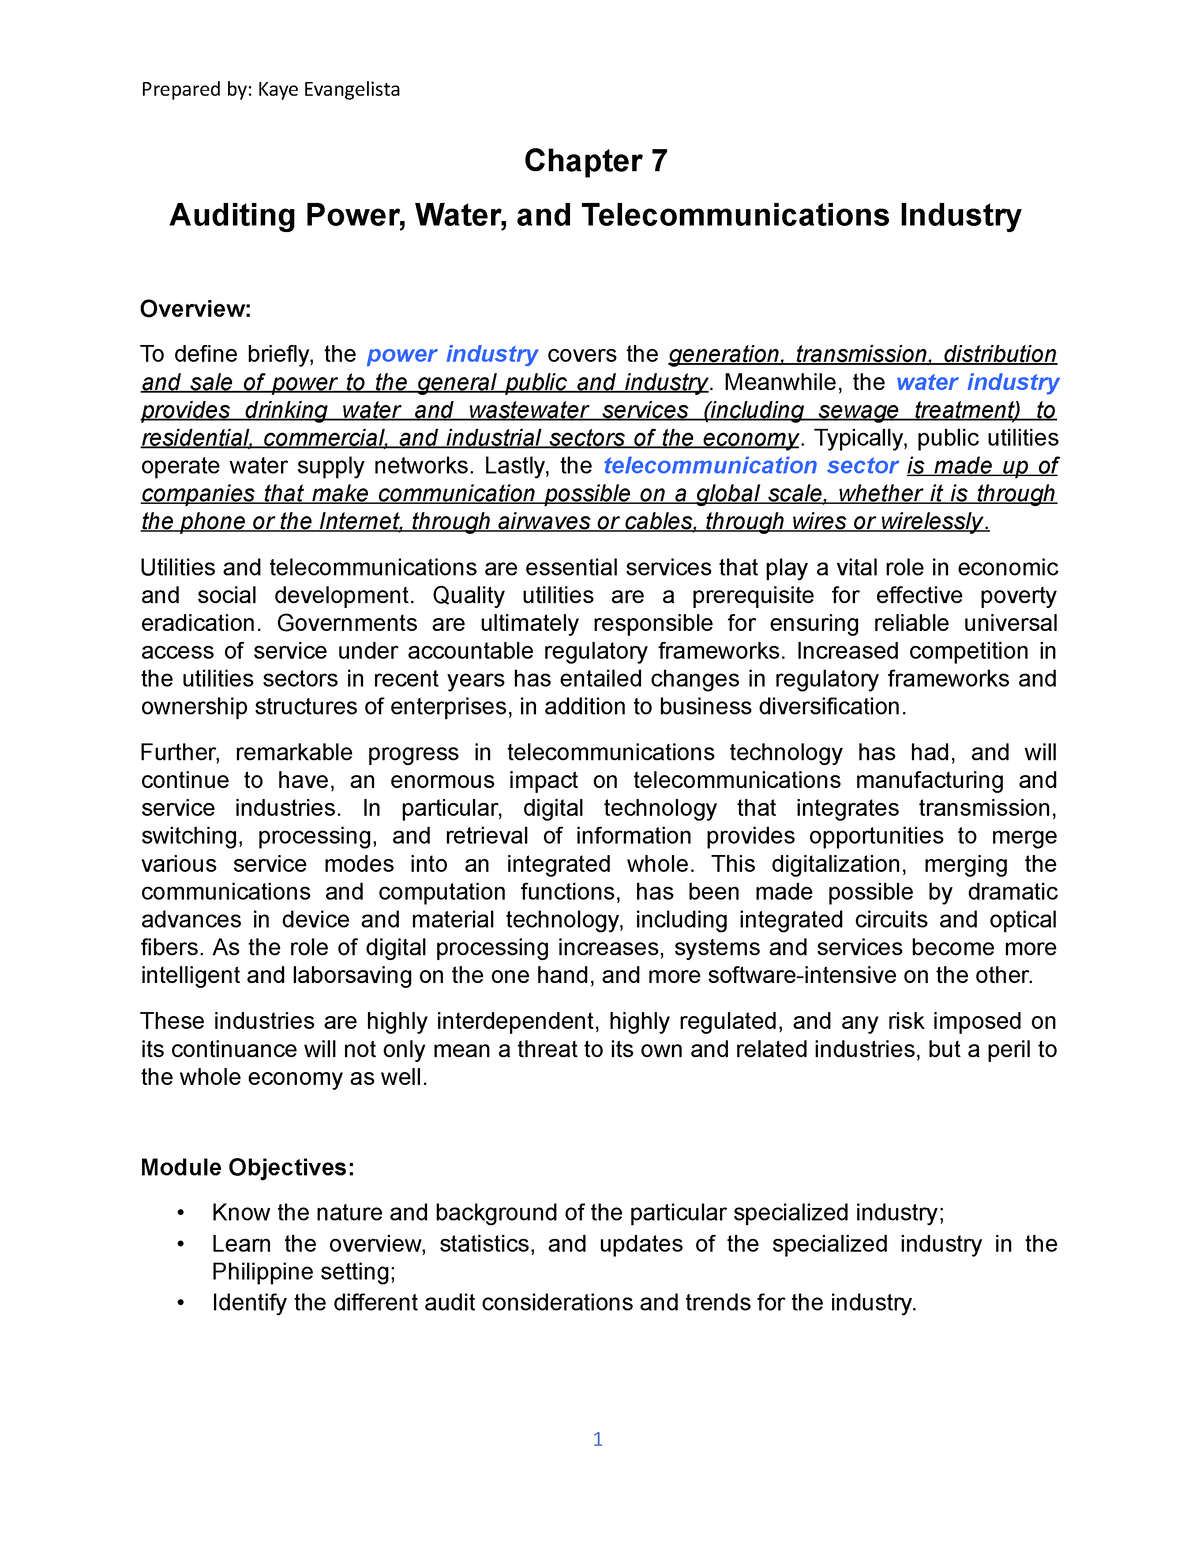 Module 7 Power Water And Telecom Industry Chapter 7 Auditing Power 